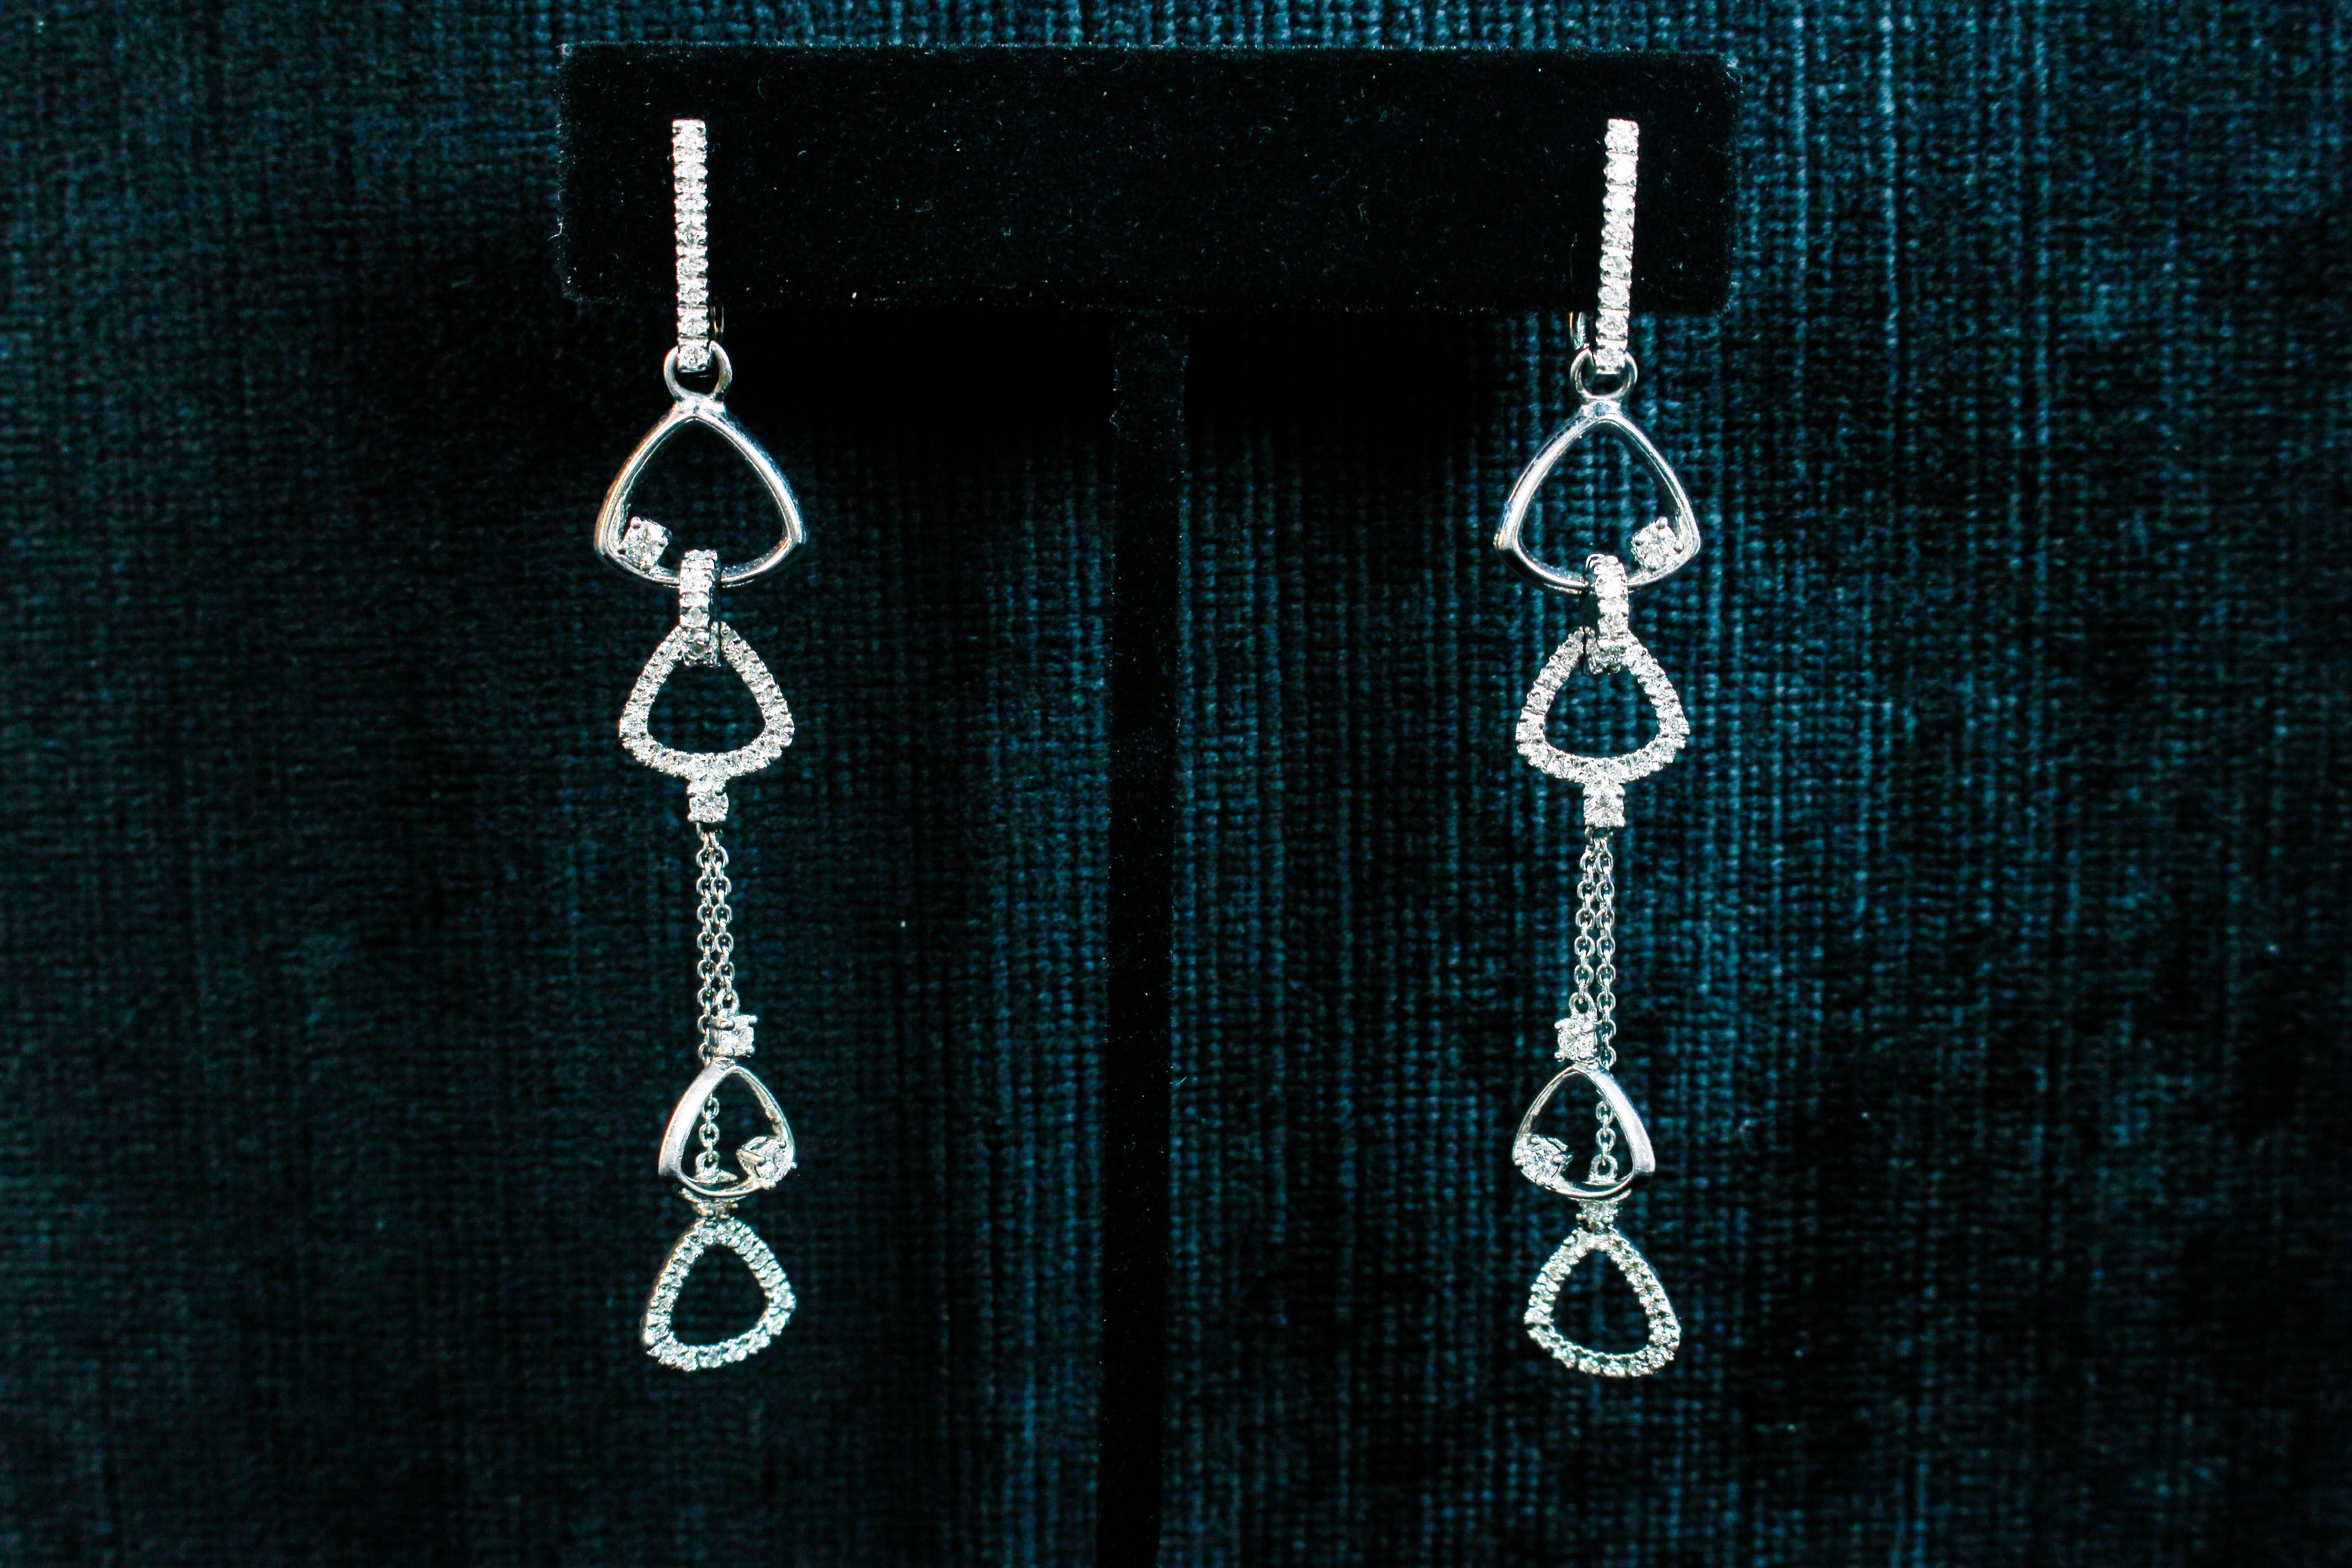 These stunning earrings feature an abstract dangle design with pave diamonds throughout and chain accents. Specs below. In excellent condition.

Please feel free to ask any questions you may have, we are happy to assist. 

Specs:
14KT White